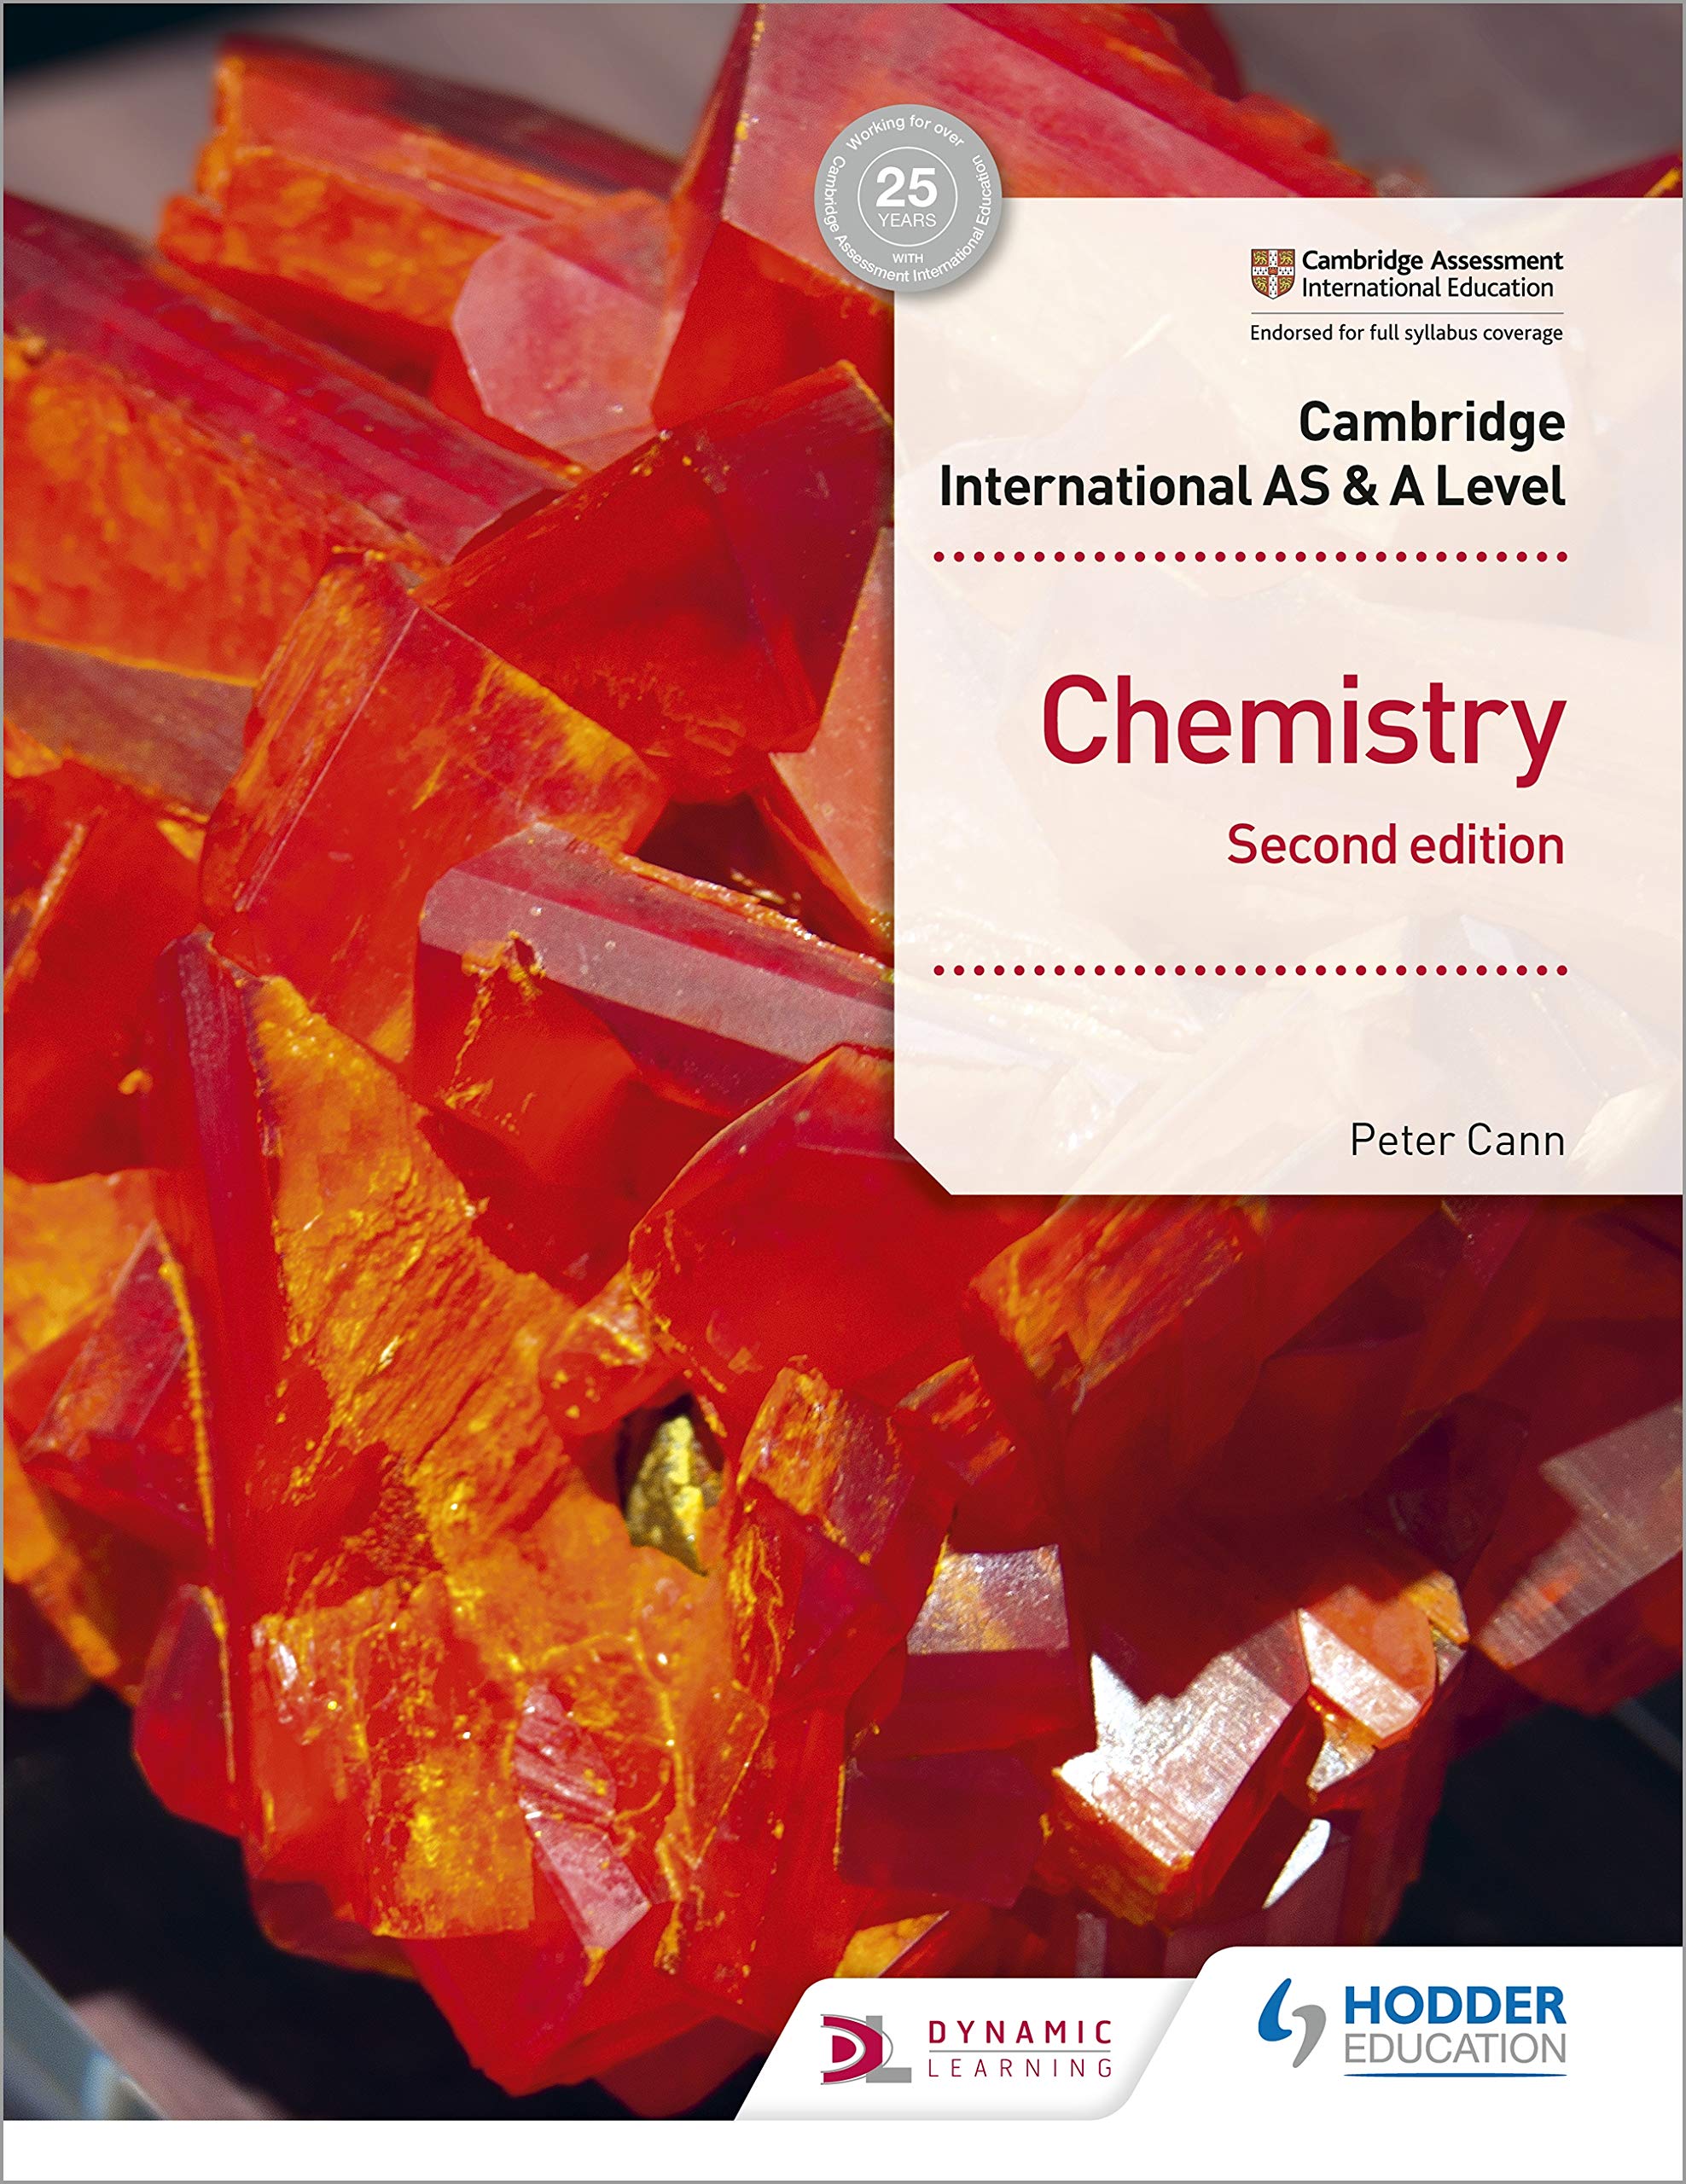 Cambridge International AS & A Level Chemistry Student's Book Second Edition By Peter Cann